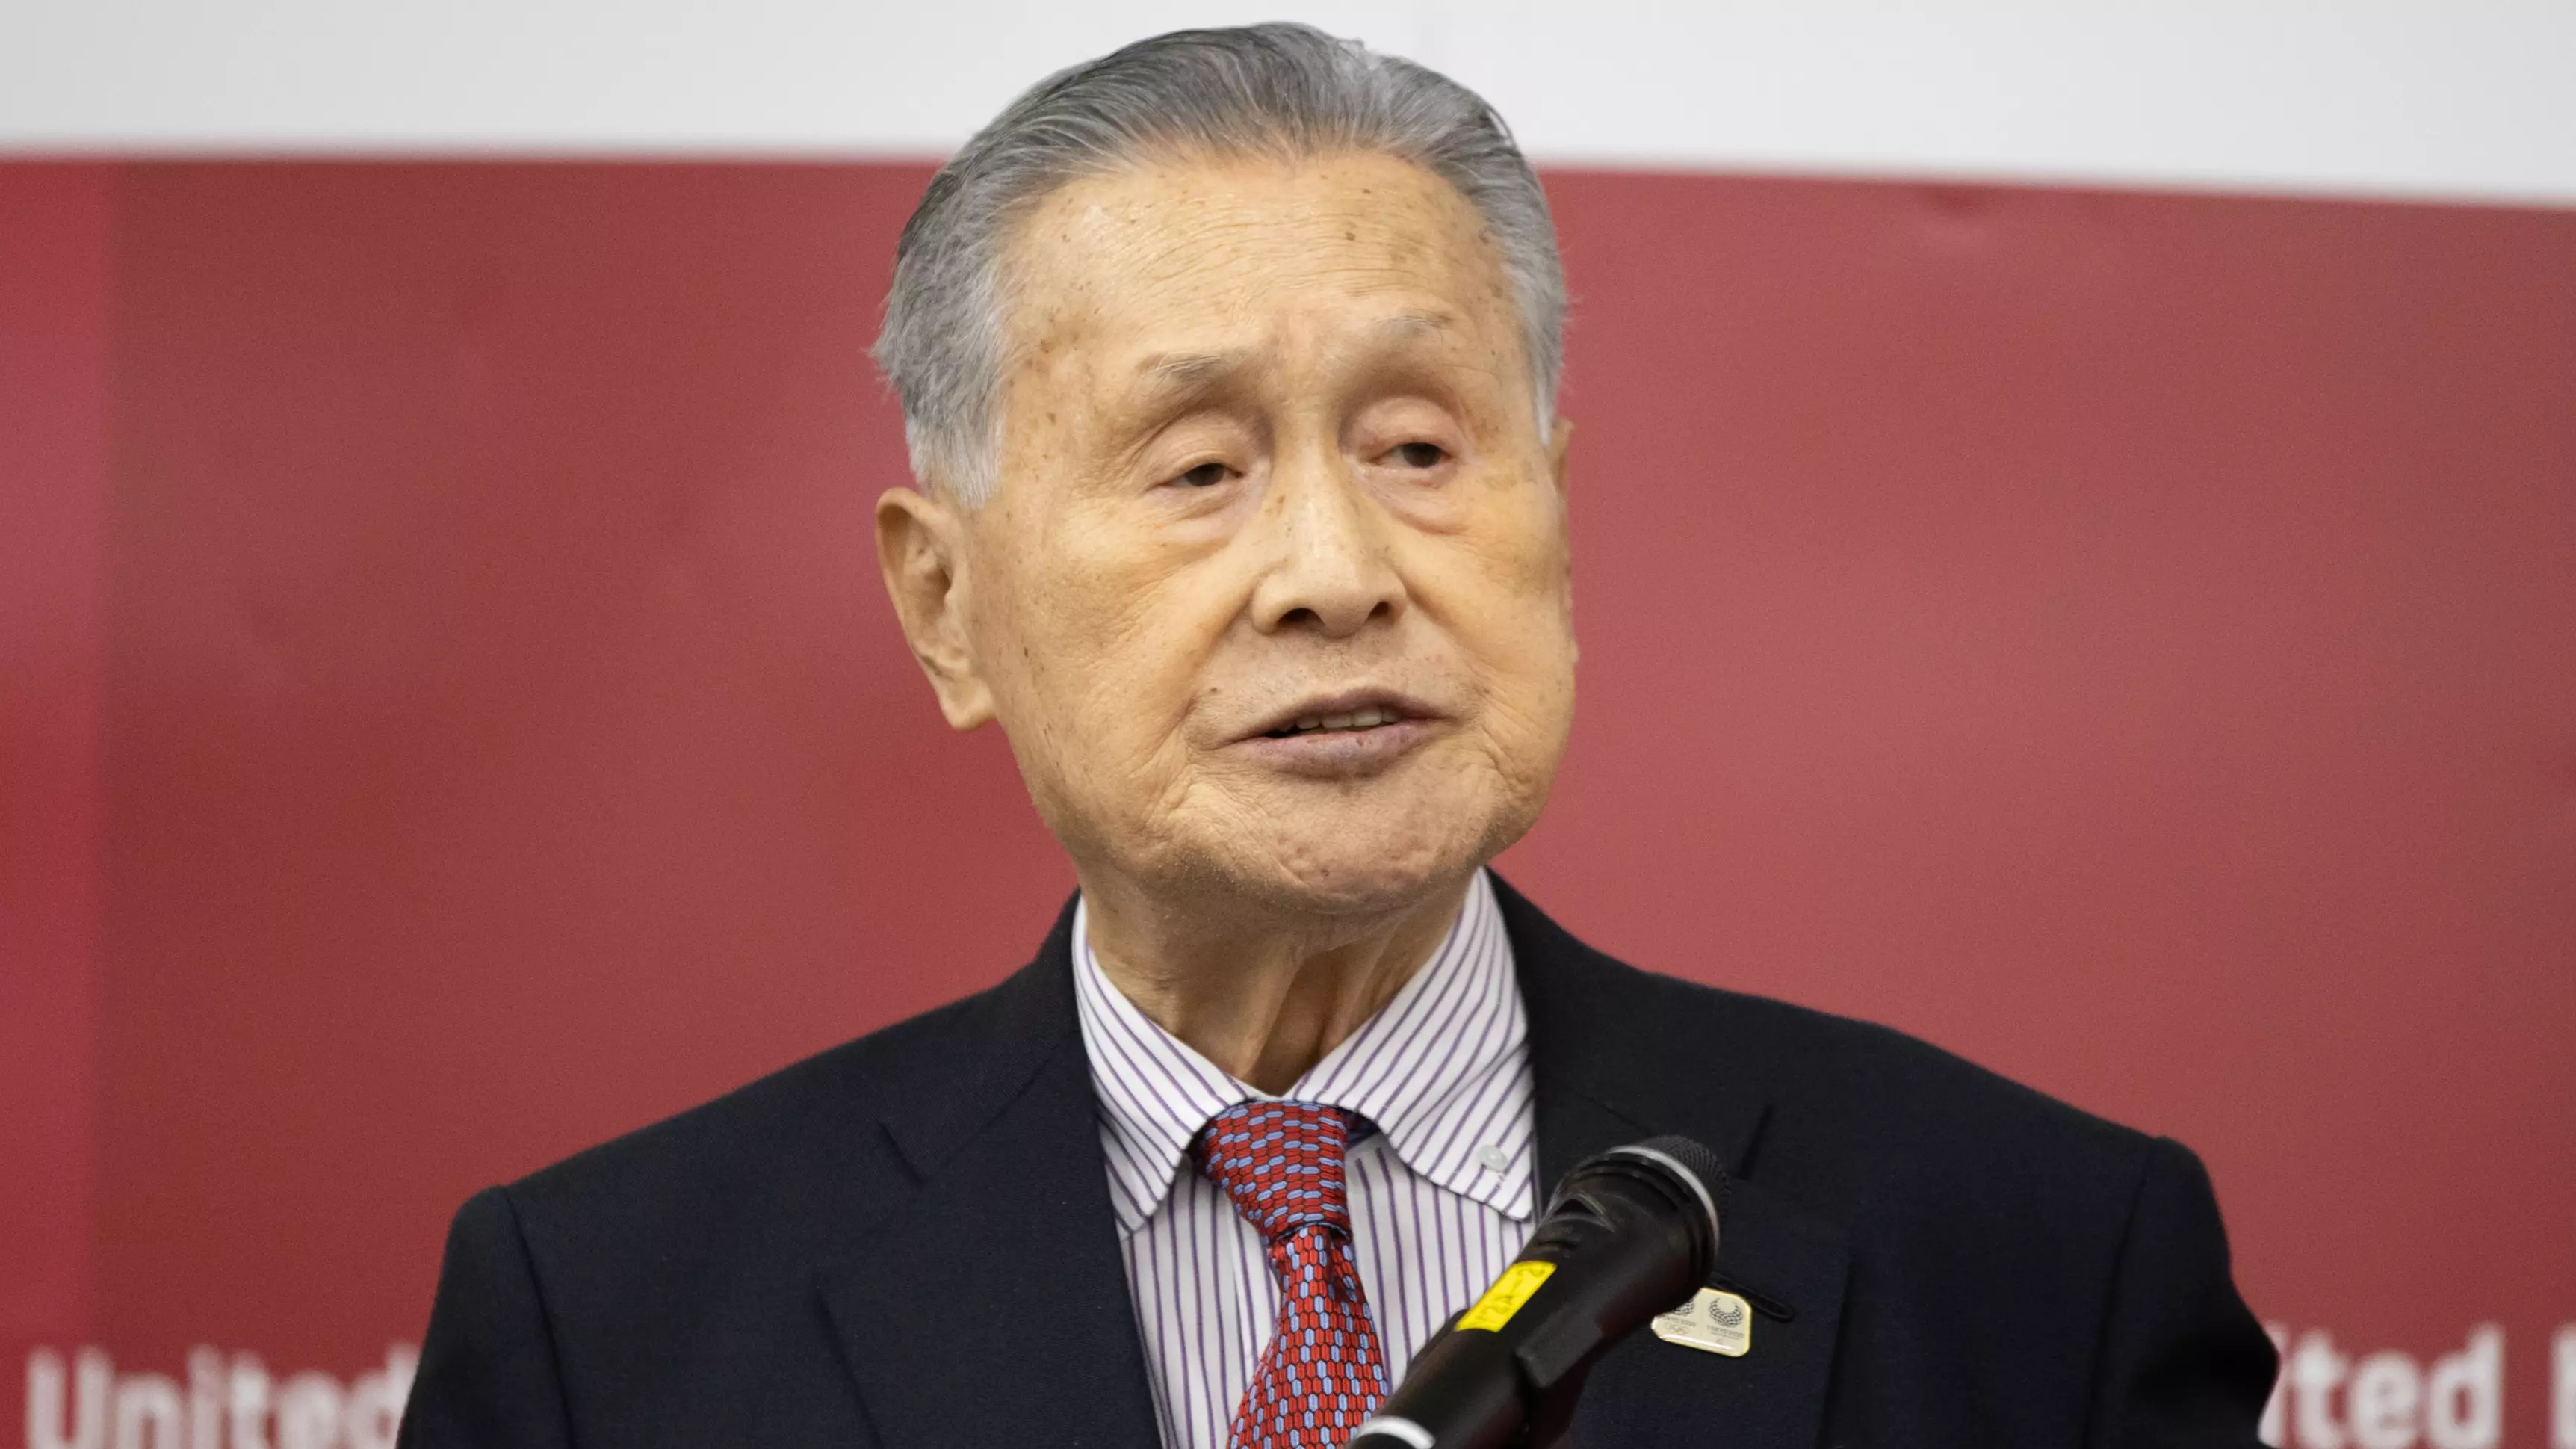 Tokyo Olympic Games Boss Apologises For Saying Women Talk Too Much